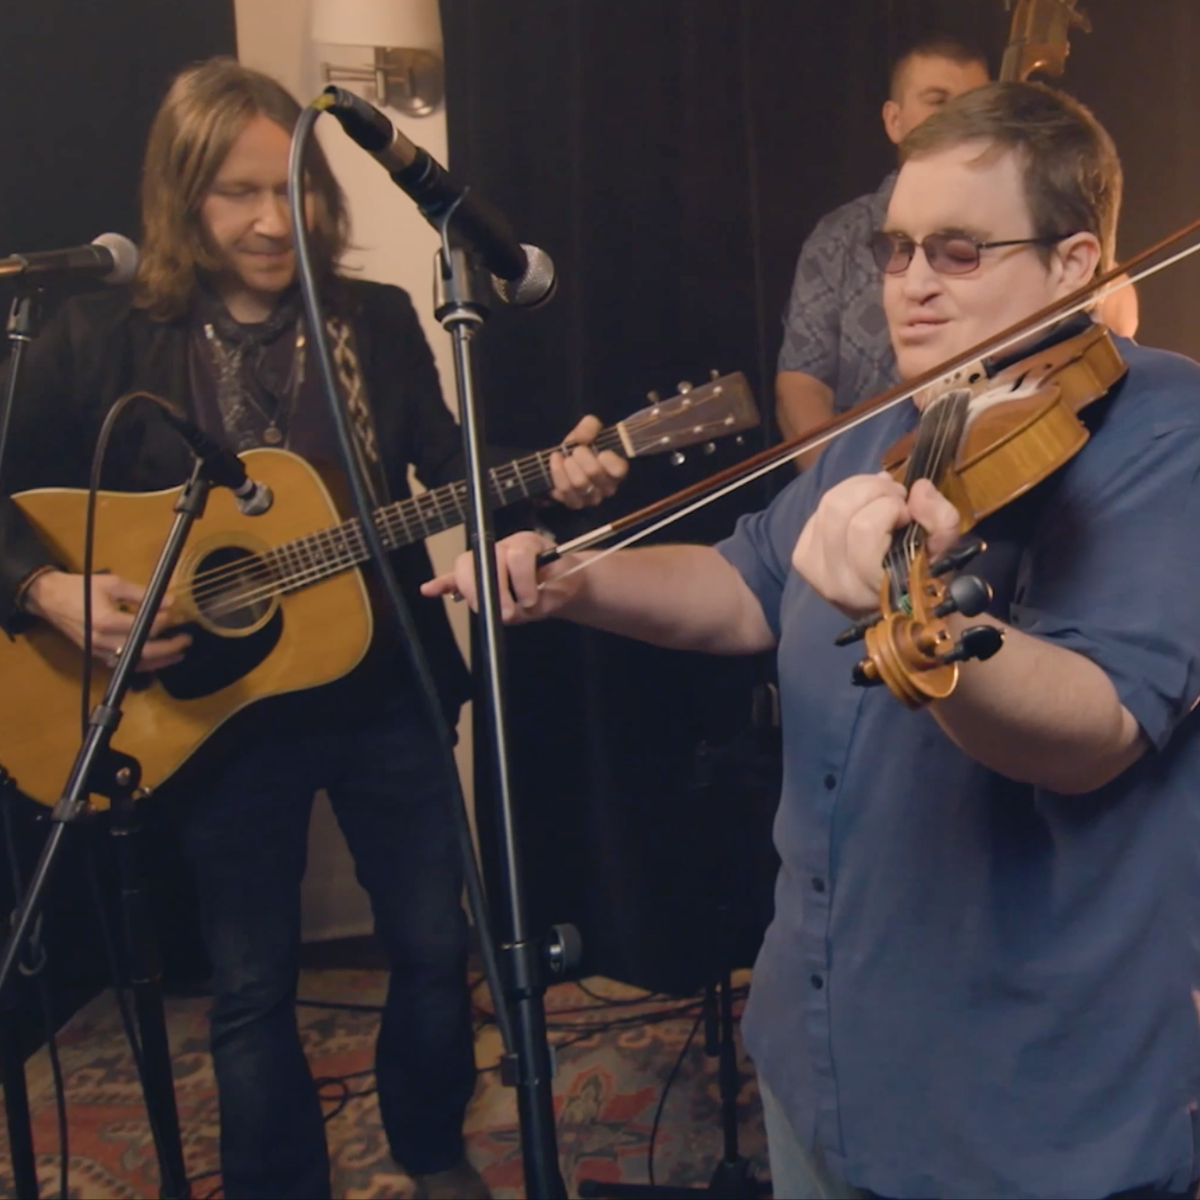 WATCH: Sean McConnell, 'Nothing on You' (featuring Lori McKenna)